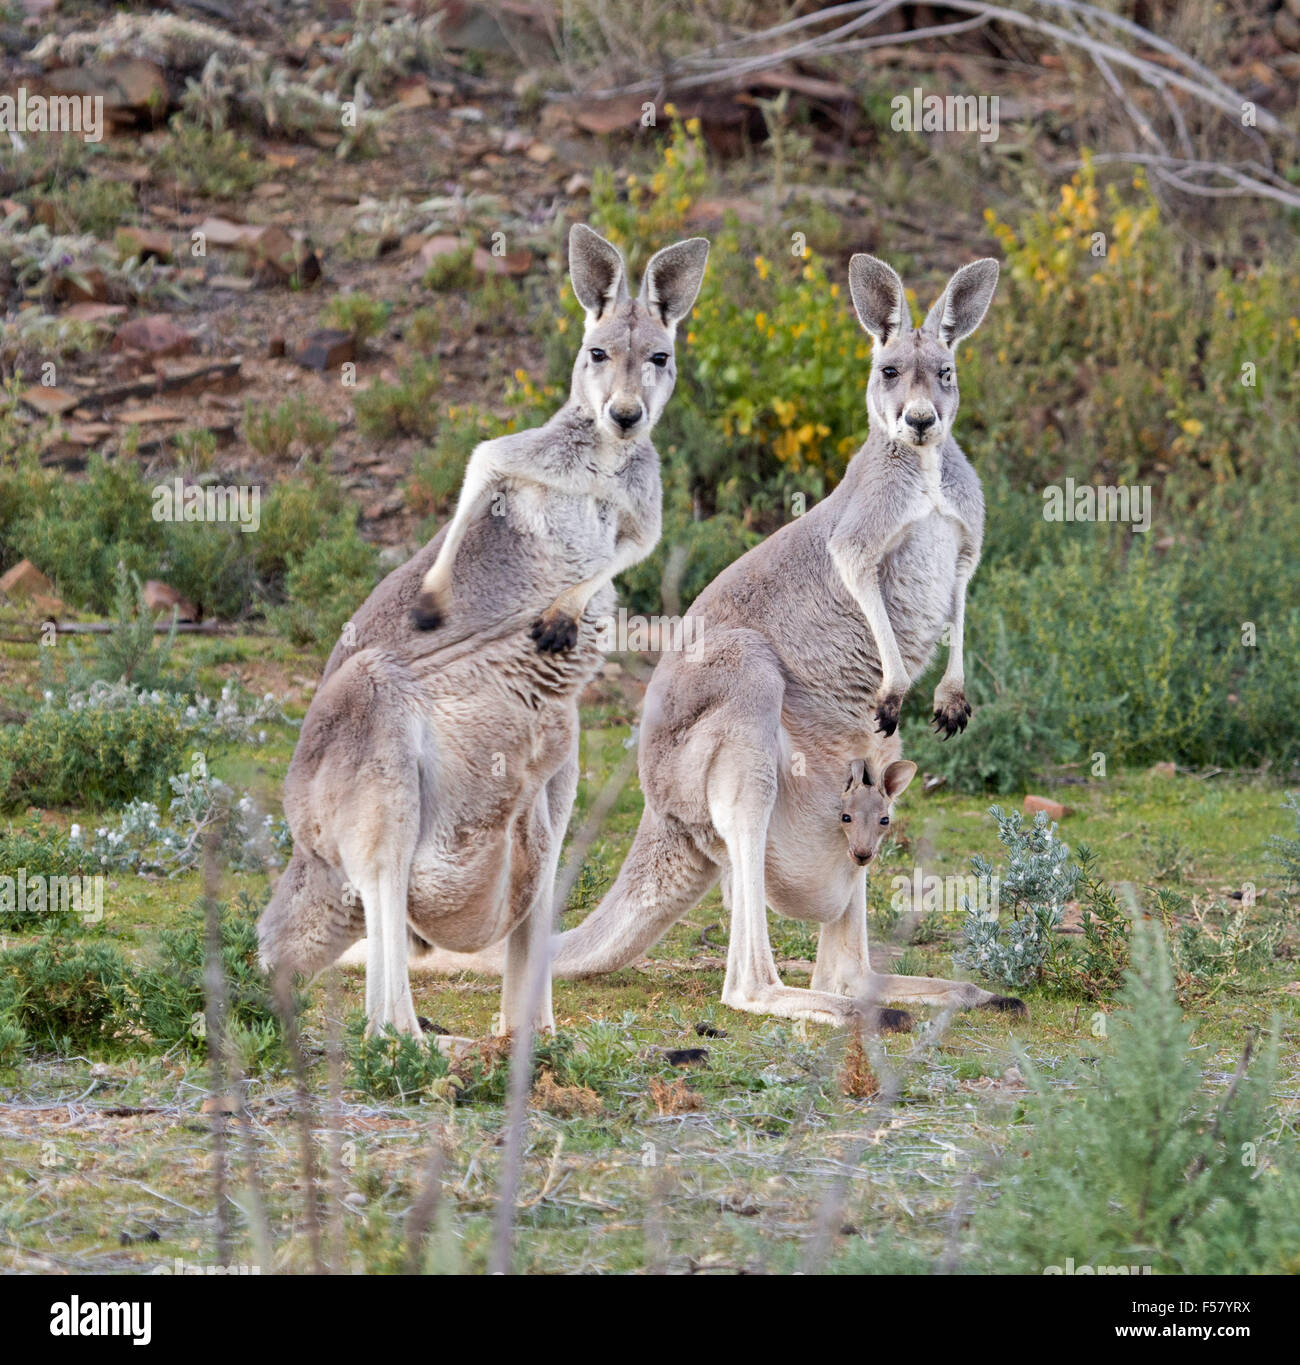 Two female red kangaroos, Macropus rufus with joeys in their pouches staring at camera at Mount Chambers gorge in outback Australia Stock Photo